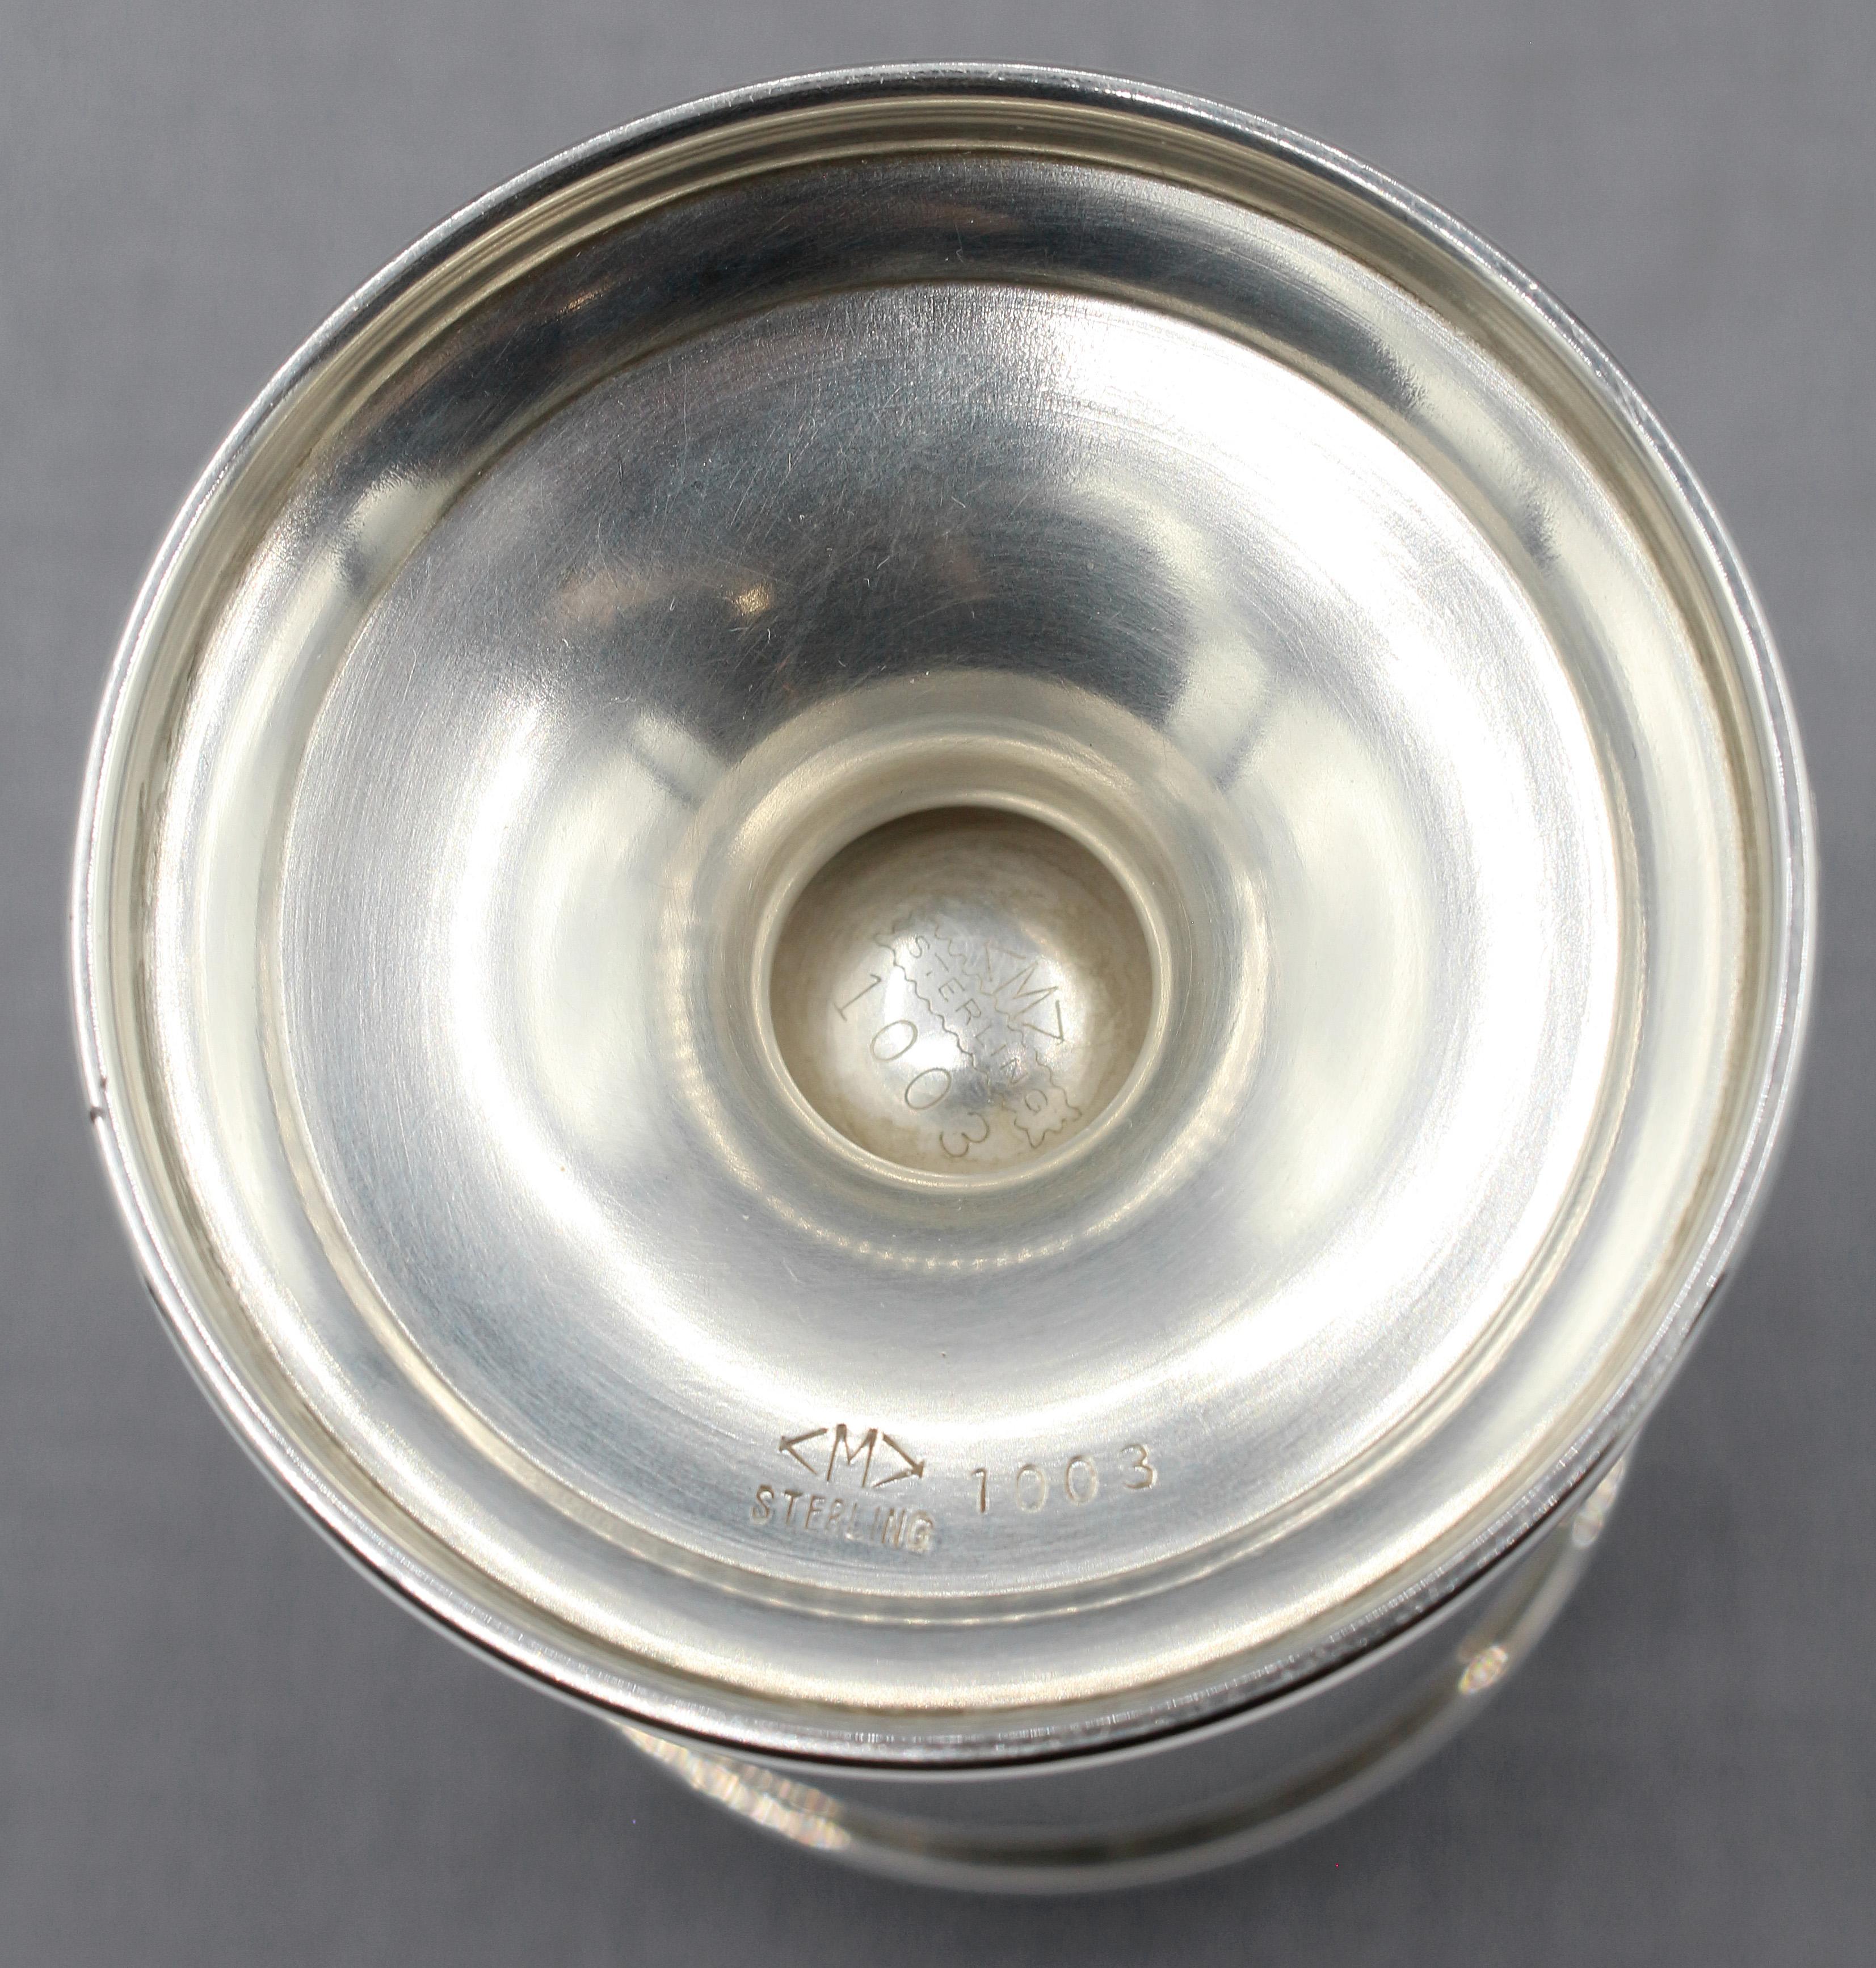 American Circa 1940s Sterling Silver Sugar Caster by Mueck & Cary For Sale